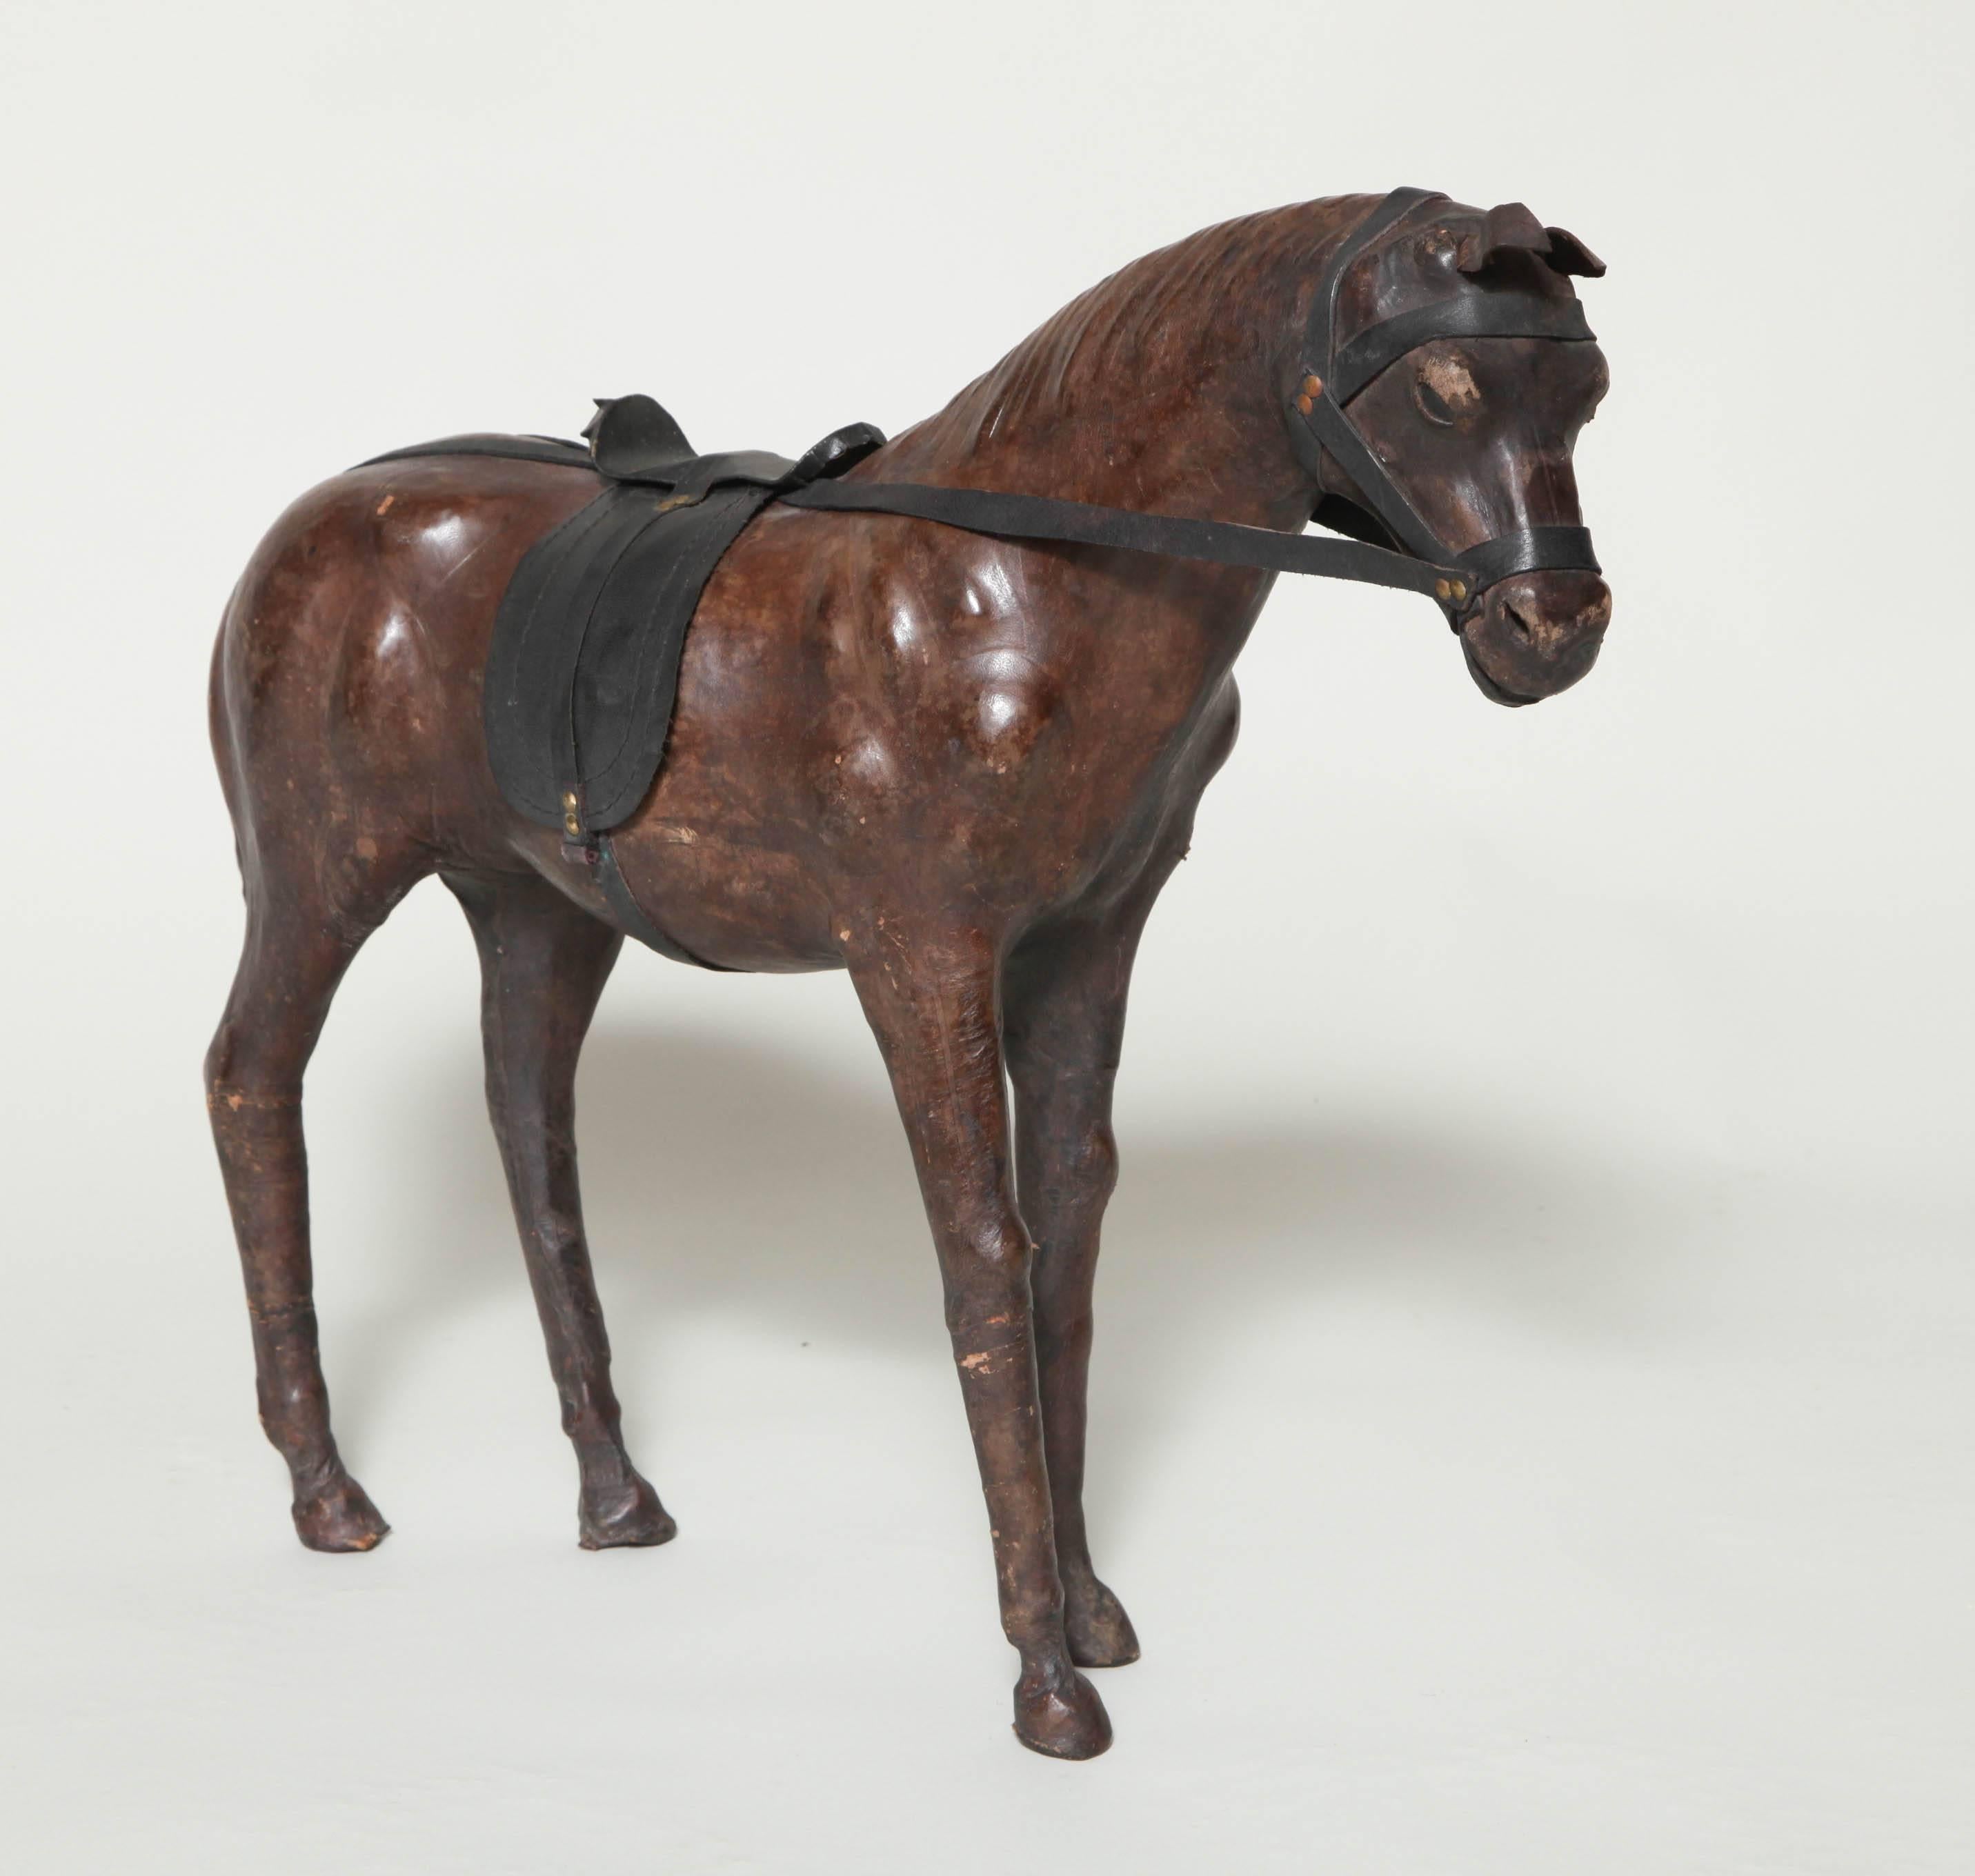 Charming and very decorative leather standing horse, the body (wood - papier mâché?) covered in thin and richly tanned leather, having inset glass eyes and brass studded tack.